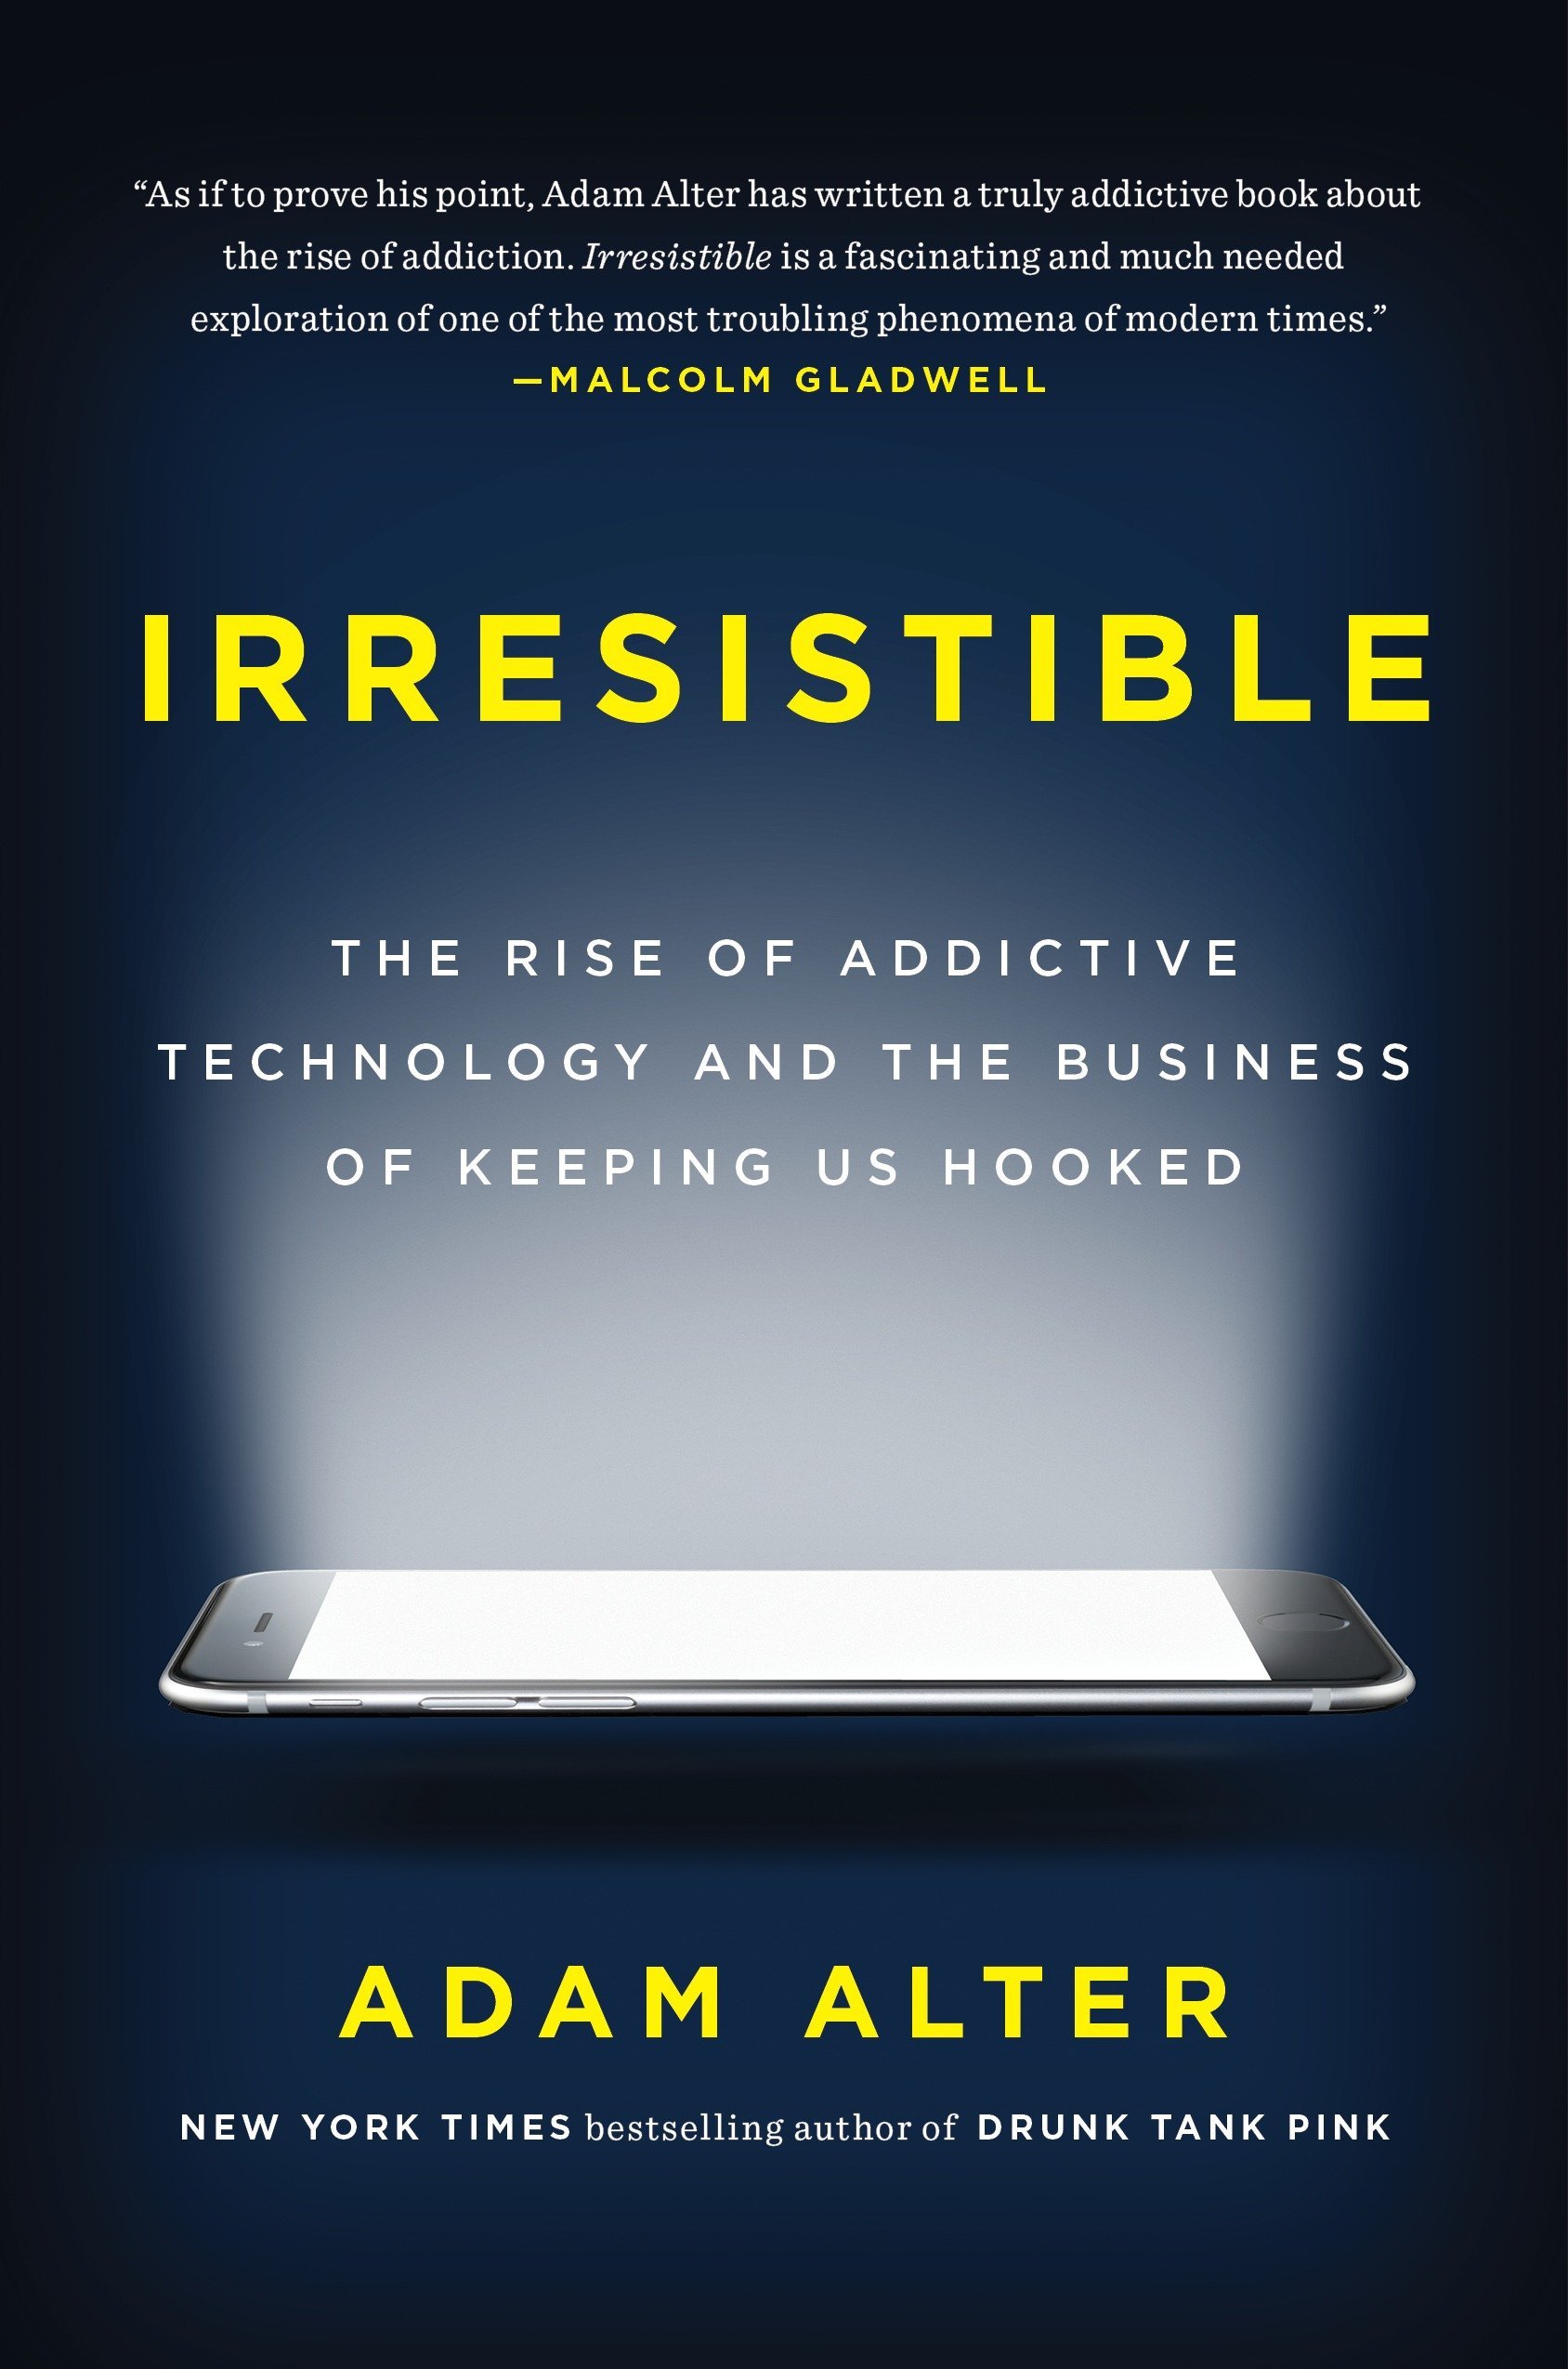 Image Irresistible : the rise of addictive technology and the business of keeping us hooked